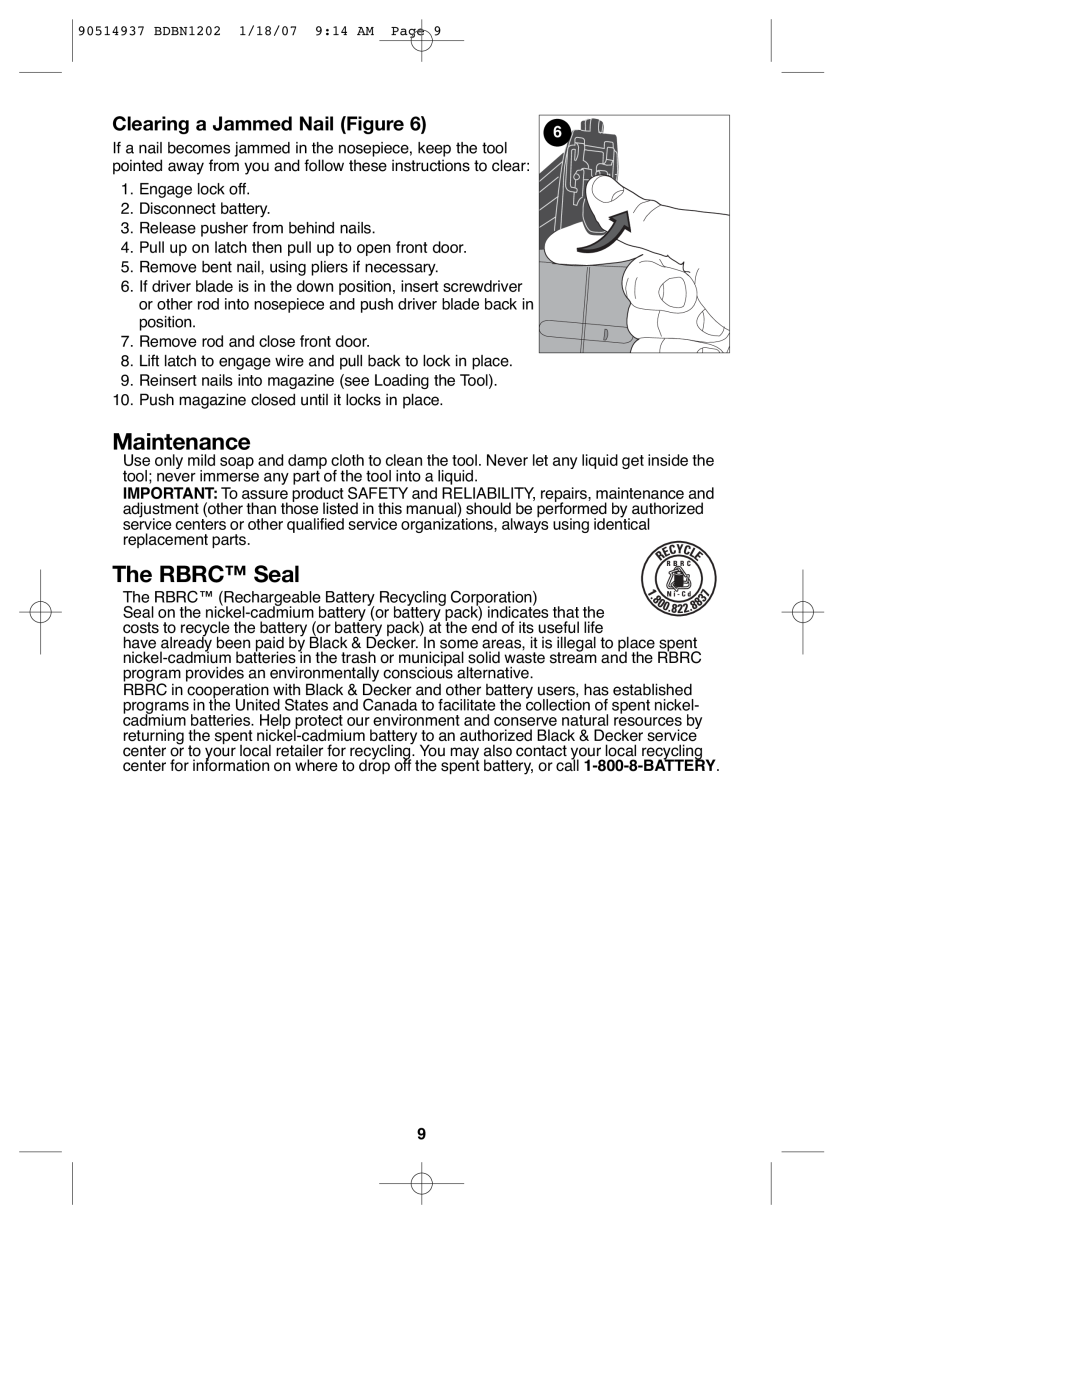 Black & Decker BDBN1202, BDBN1802, 90514937 instruction manual Maintenance, The RBRC Seal, Clearing a Jammed Nail Figure 